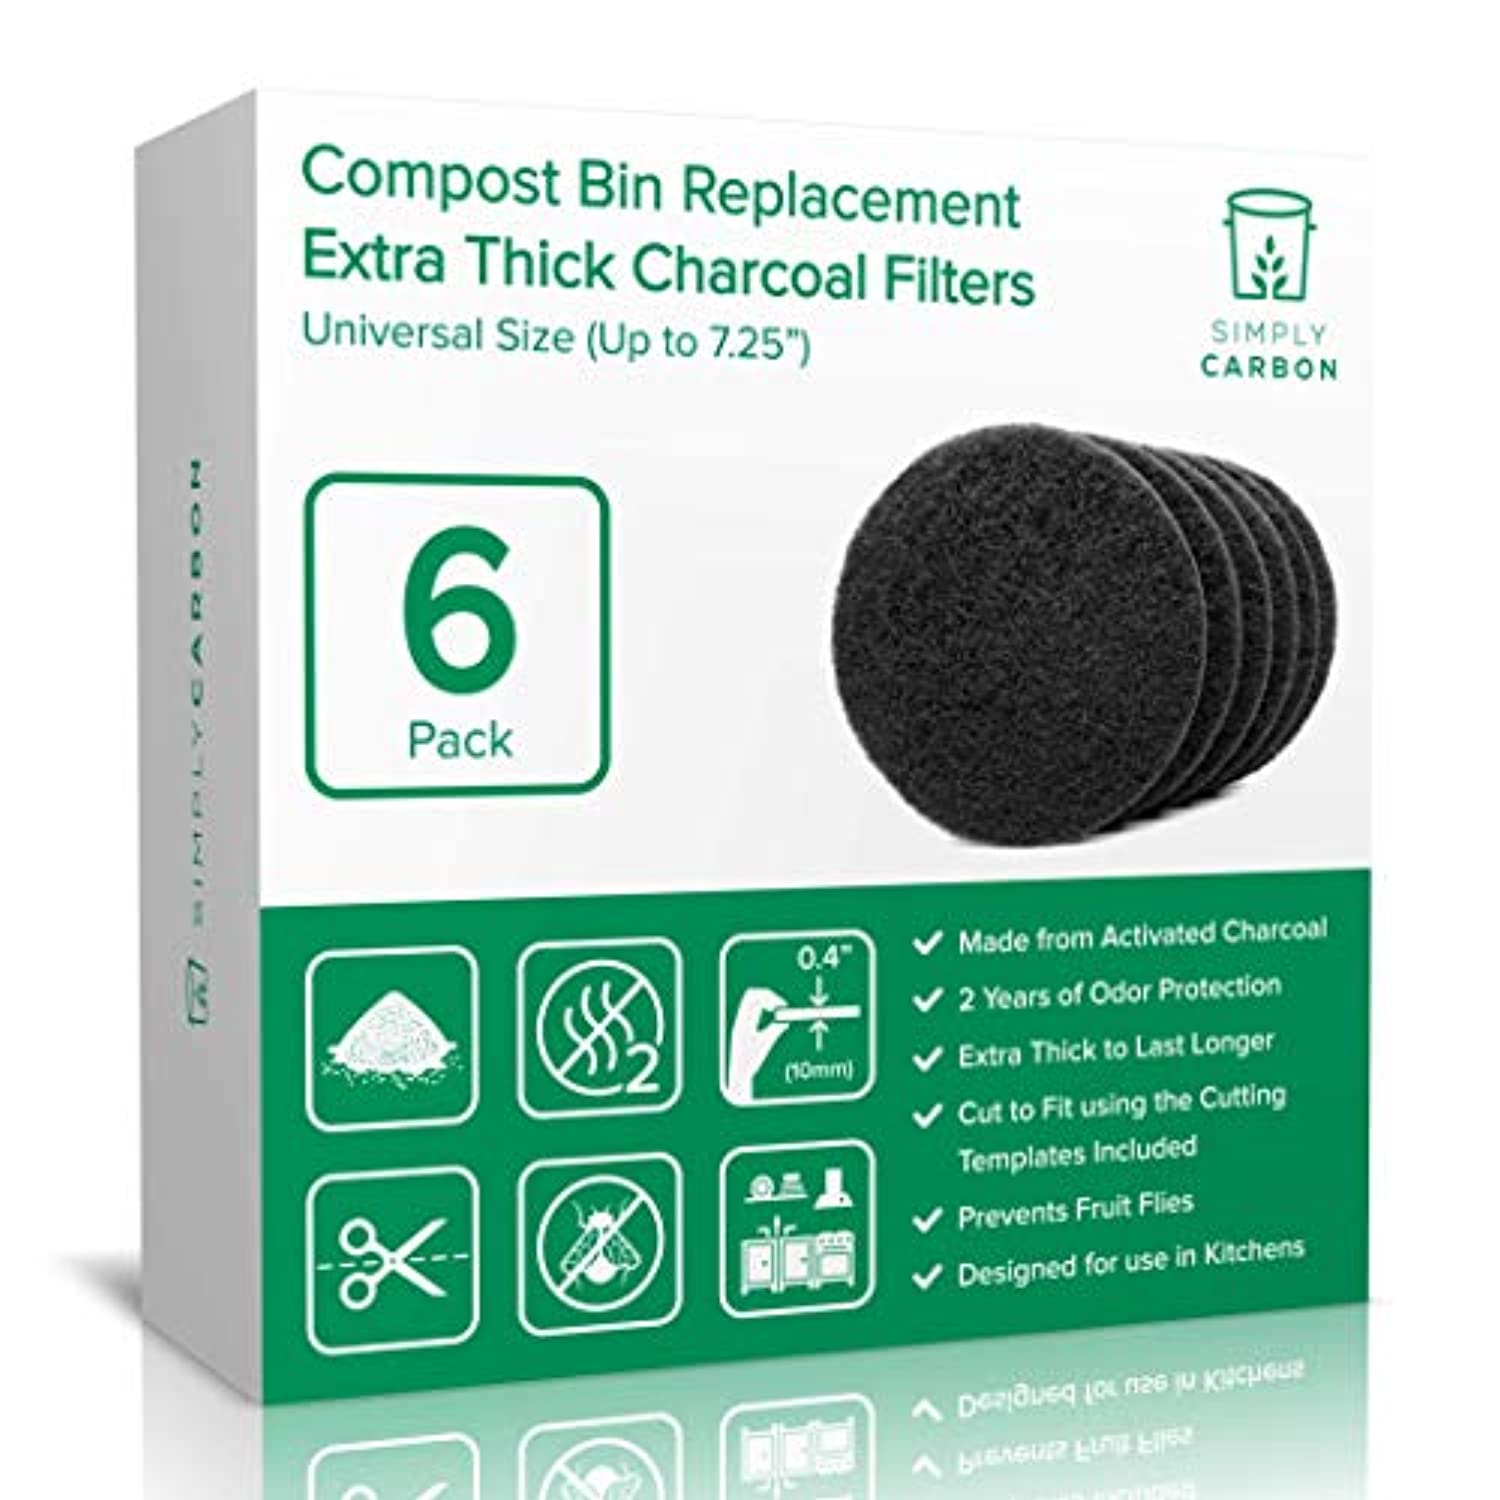 Compost Bin Kitchen Charcoal Filter, 12 Pack Charcoal Filters for Compost  Bucket, Kitchen Compost Bin Countertop Filters, Compost Filters for